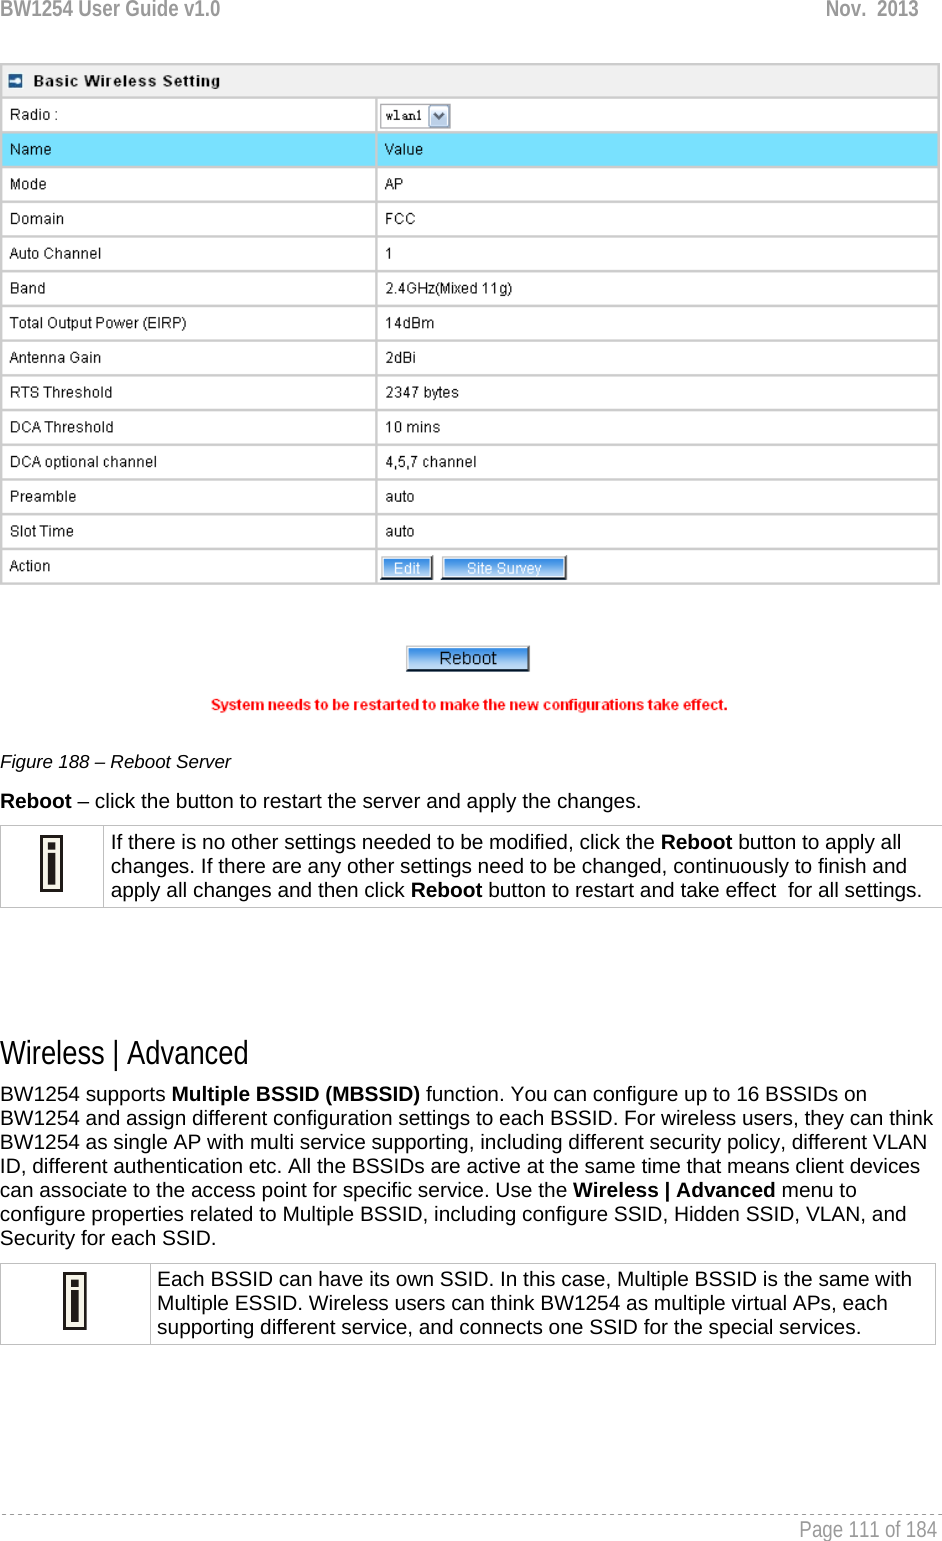 BW1254 User Guide v1.0  Nov.  2013     Page 111 of 184    Figure 188 – Reboot Server Reboot – click the button to restart the server and apply the changes.  If there is no other settings needed to be modified, click the Reboot button to apply all changes. If there are any other settings need to be changed, continuously to finish and apply all changes and then click Reboot button to restart and take effect  for all settings.    Wireless | Advanced  BW1254 supports Multiple BSSID (MBSSID) function. You can configure up to 16 BSSIDs on BW1254 and assign different configuration settings to each BSSID. For wireless users, they can think BW1254 as single AP with multi service supporting, including different security policy, different VLAN ID, different authentication etc. All the BSSIDs are active at the same time that means client devices can associate to the access point for specific service. Use the Wireless | Advanced menu to configure properties related to Multiple BSSID, including configure SSID, Hidden SSID, VLAN, and Security for each SSID.  Each BSSID can have its own SSID. In this case, Multiple BSSID is the same with Multiple ESSID. Wireless users can think BW1254 as multiple virtual APs, each supporting different service, and connects one SSID for the special services.    